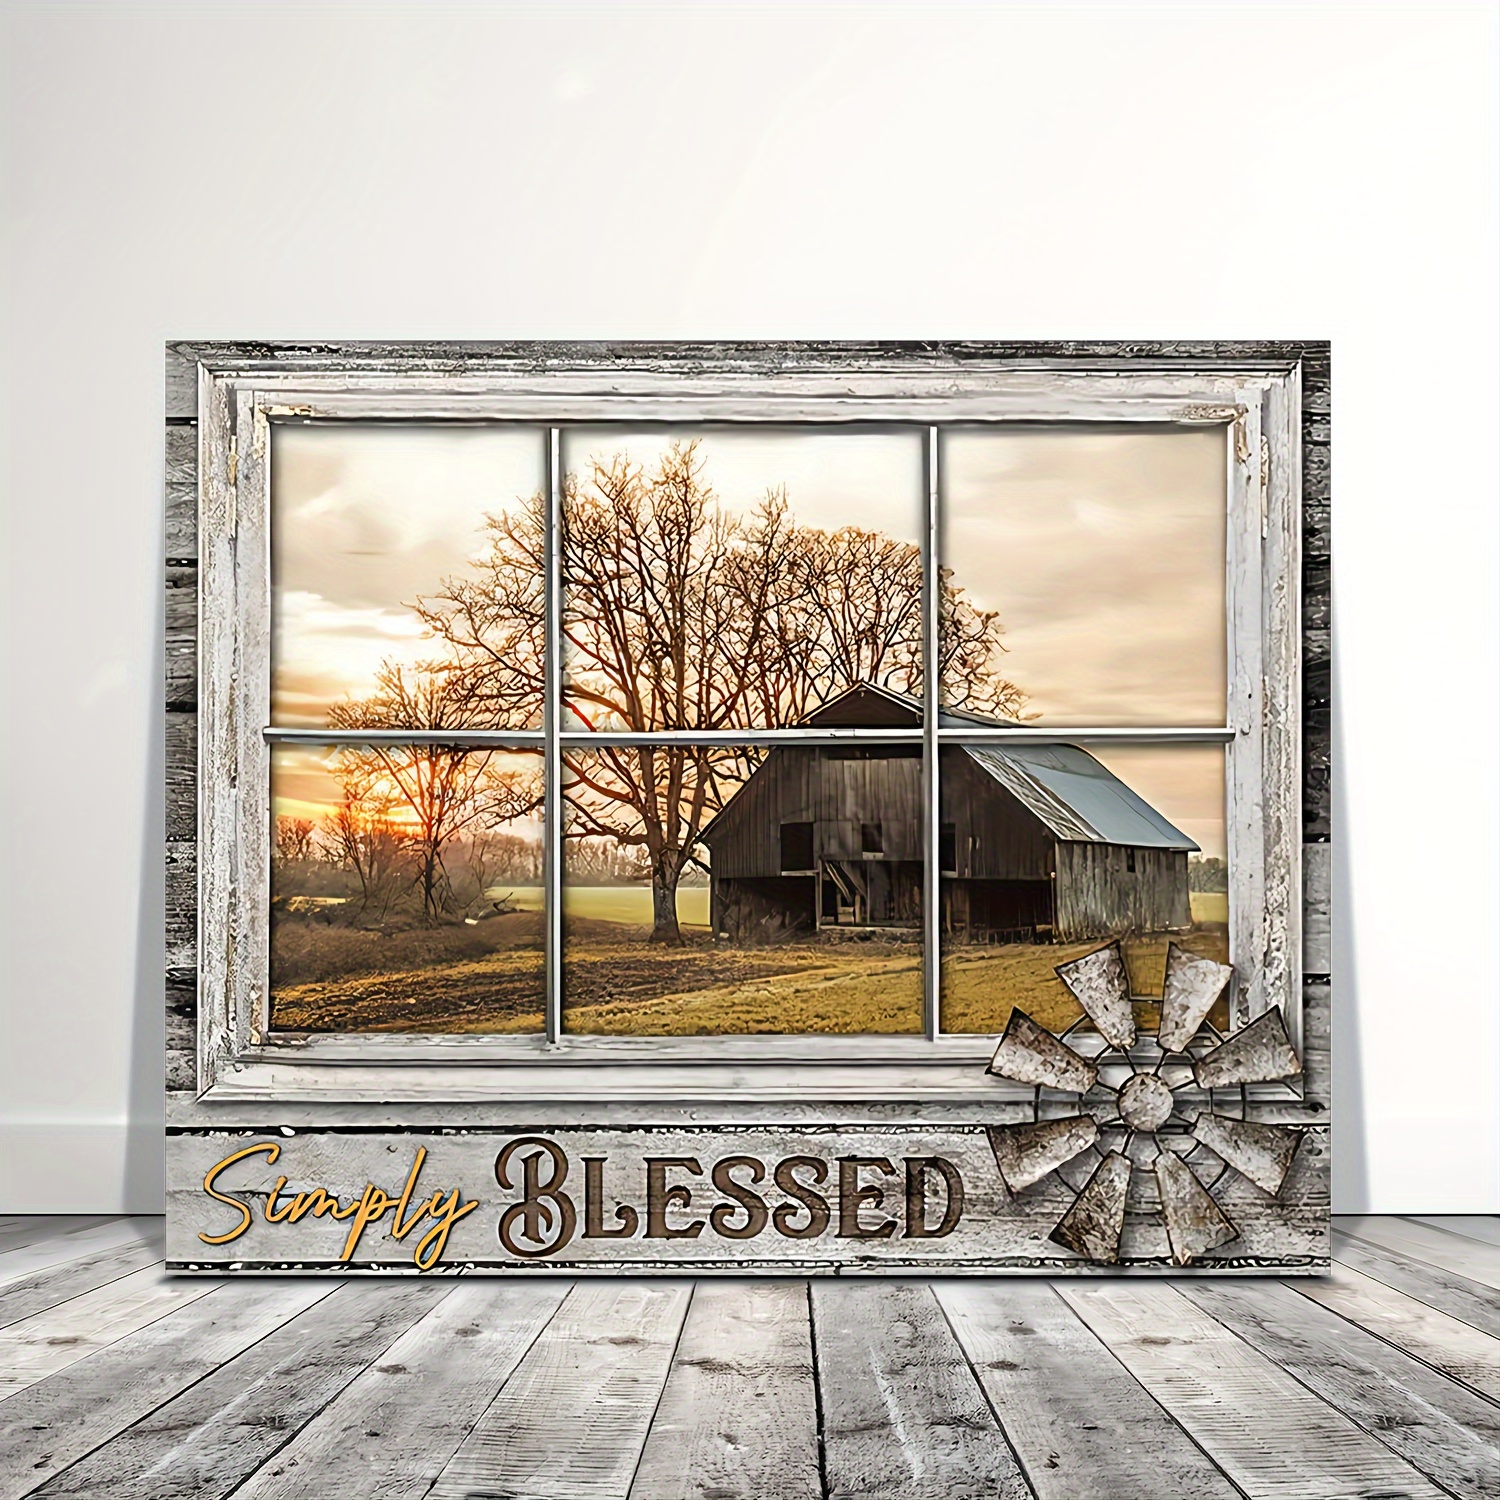 

1pc Wooden Framed, Rustic Old Barn Canvas Wall Art Farmhouse Barn Family Decor Print Paintings Country Scenery In Fake Window Pictures Modern Home Artwork Decor For Living Room 11.8inx15.7inch